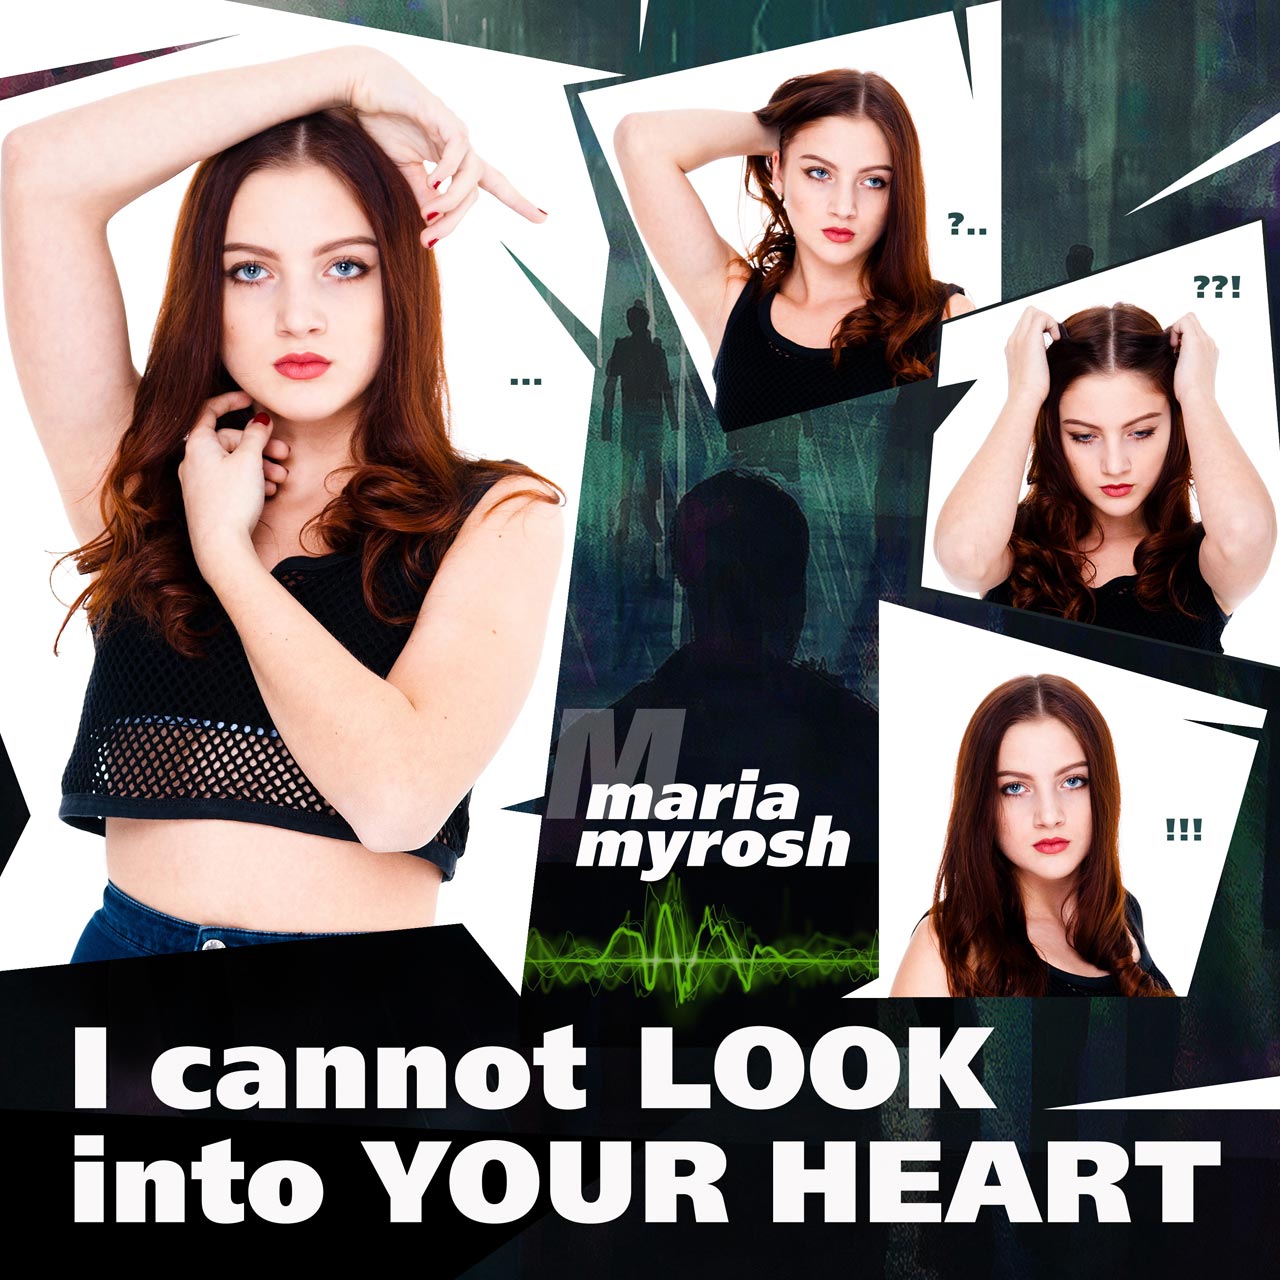 Maria Myrosh - I cannot look into your heart